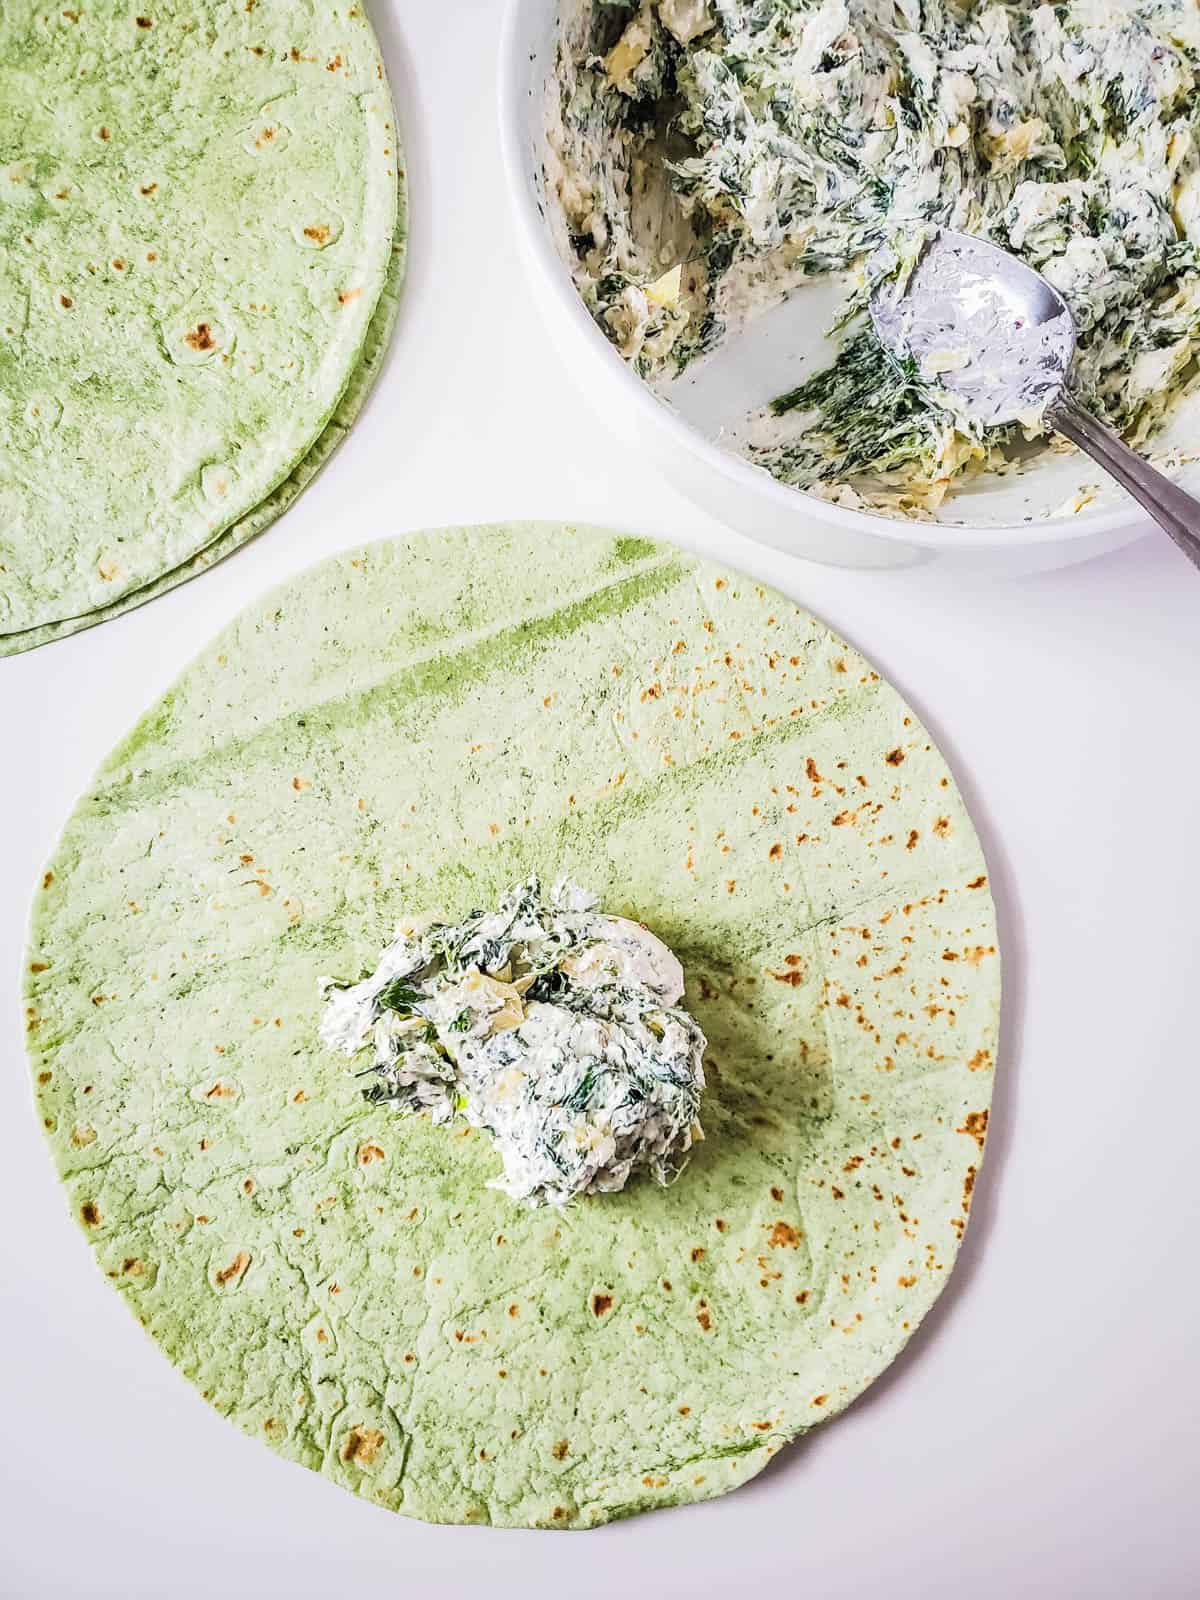 Topping a spinach tortilla with spinach and artichoke dip.